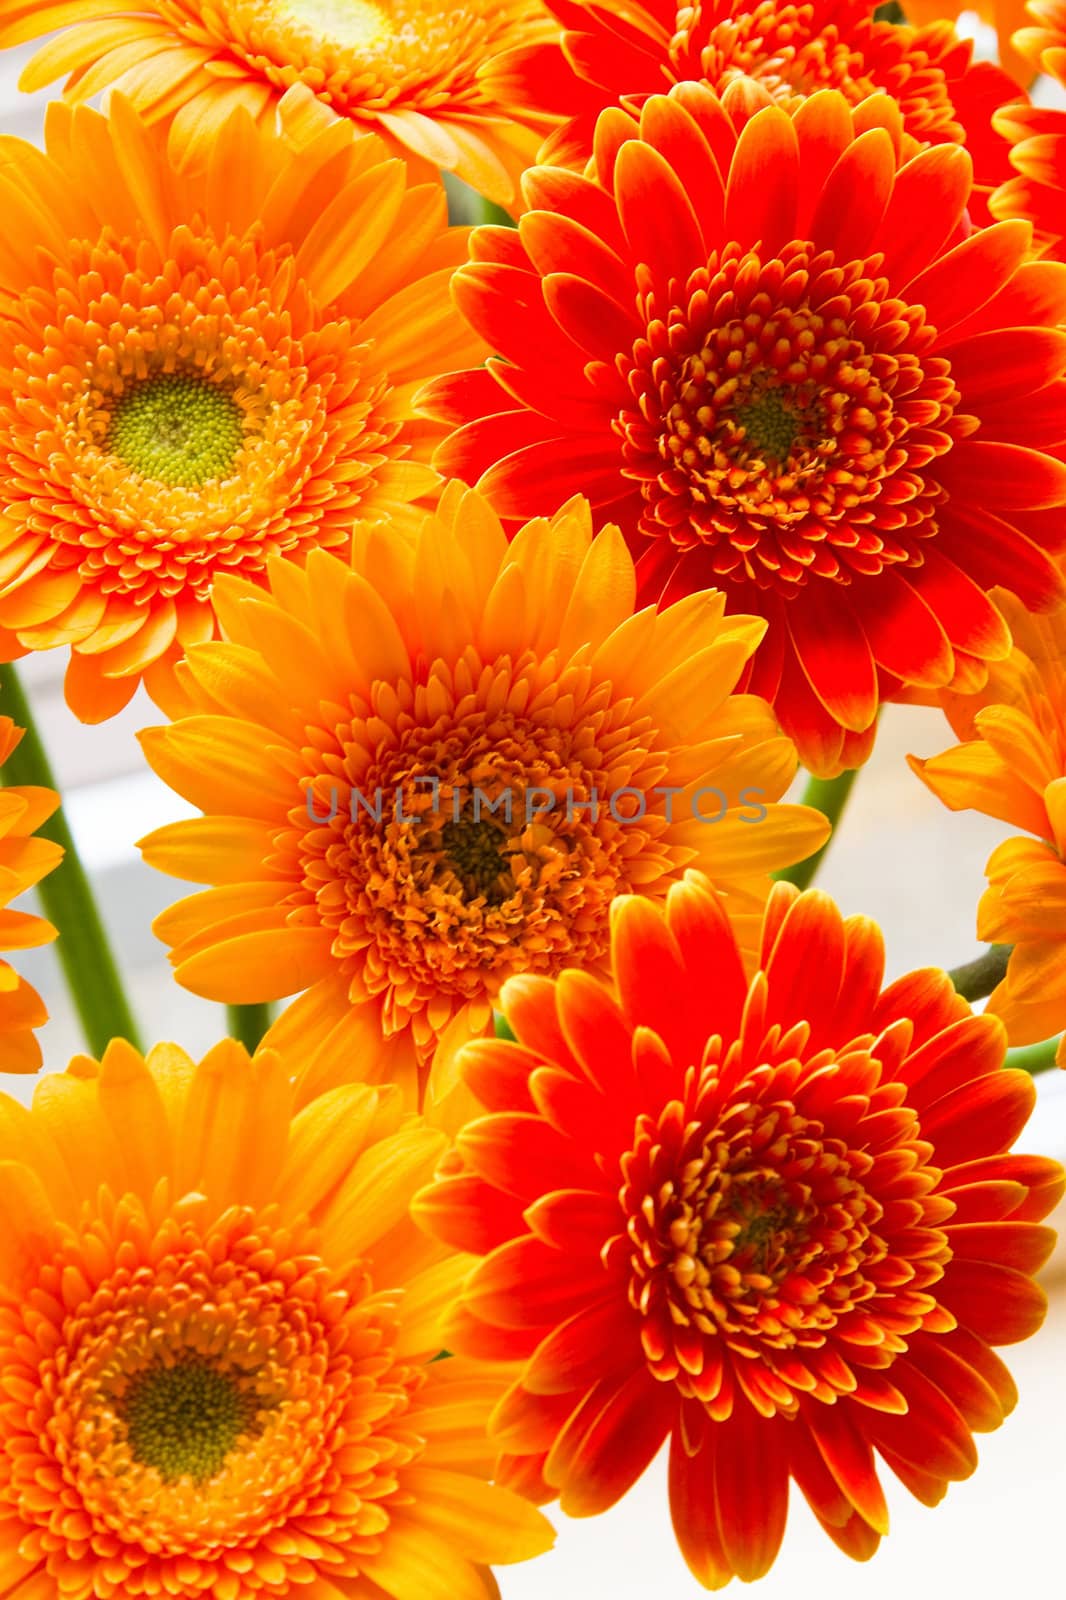 Yellow and red gerberas by Colette